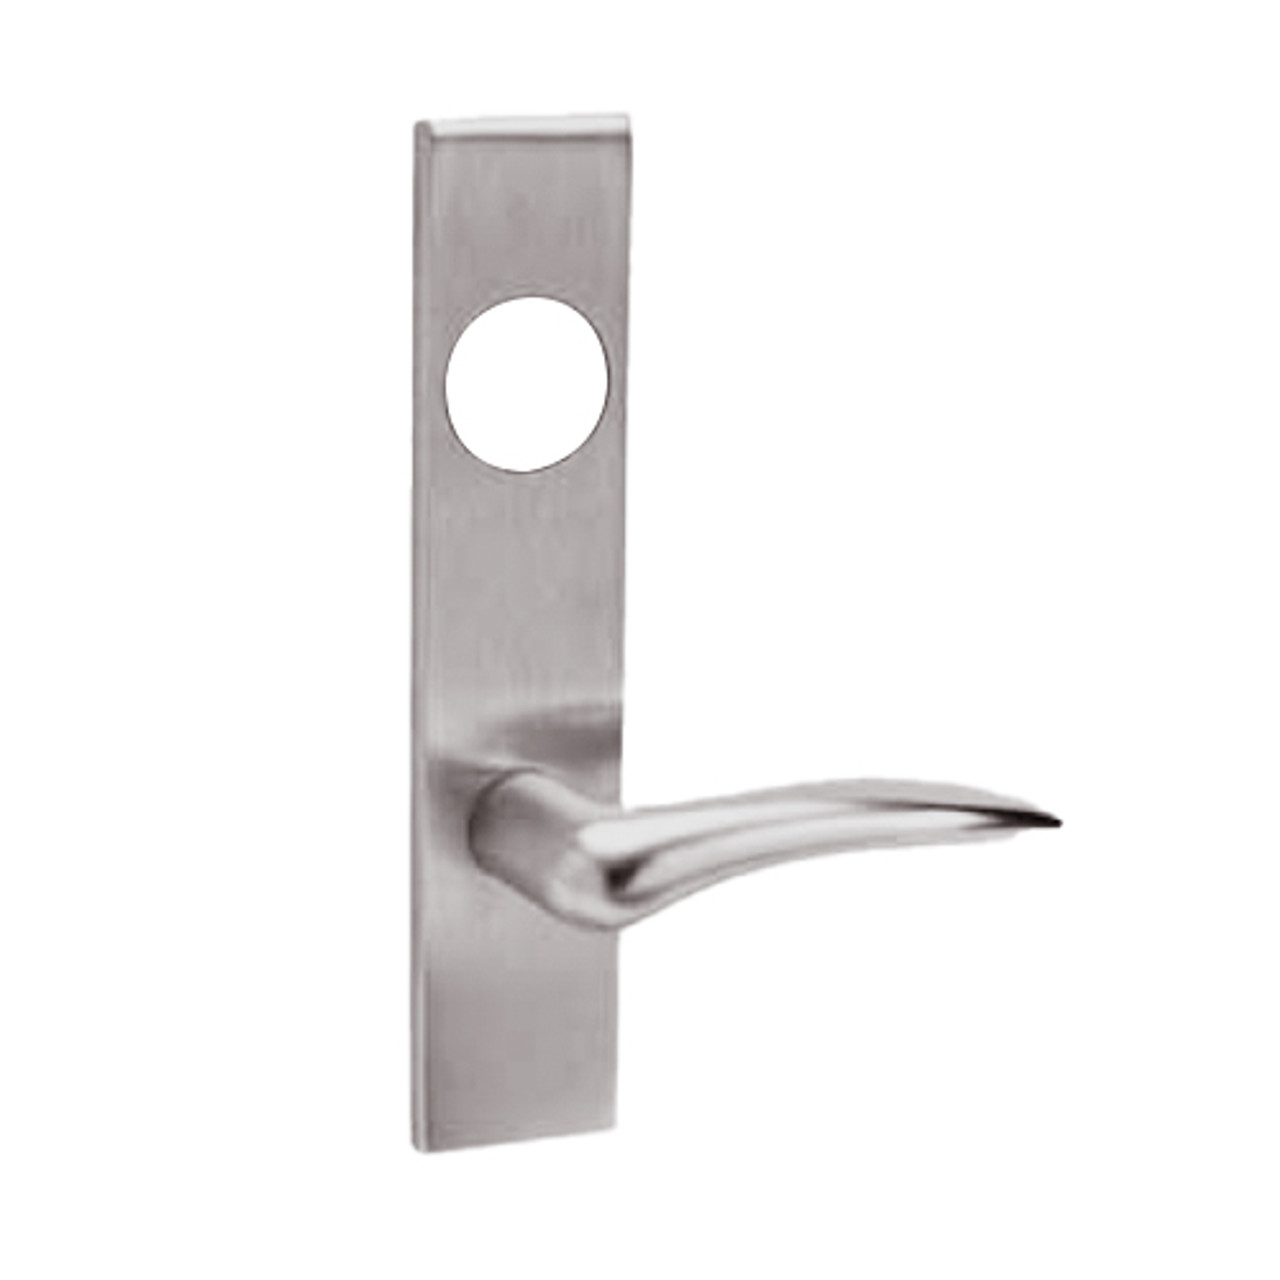 ML2067-DSR-630-LH-M31 Corbin Russwin ML2000 Series Mortise Apartment Trim Pack with Dirke Lever in Satin Stainless